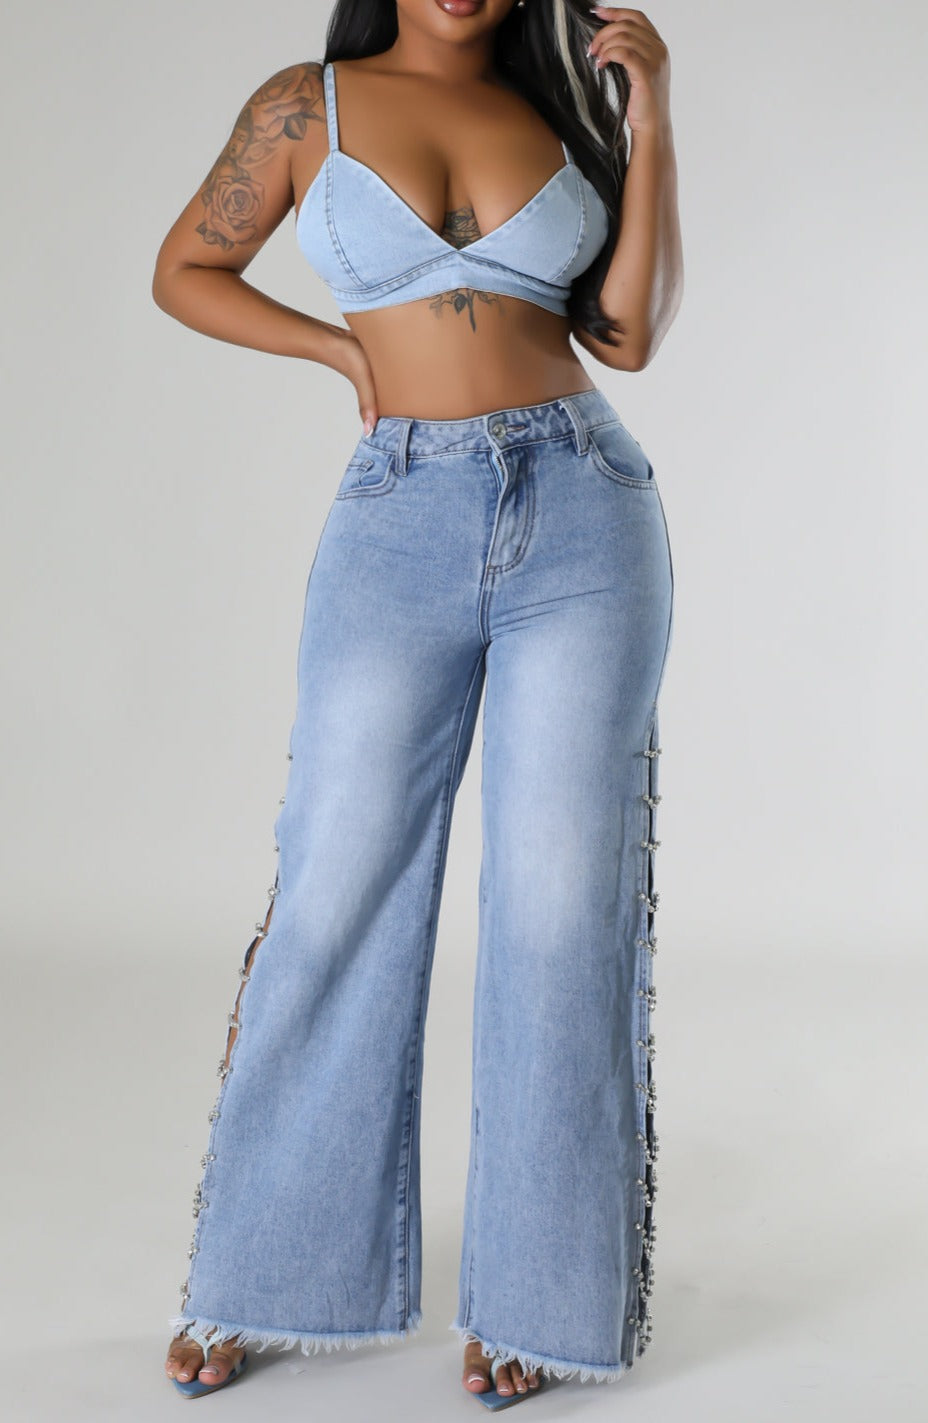 Rhinestone Embellished Wide Leg Jeans - SASHAY COUTURE BOUTIQUE Bottoms